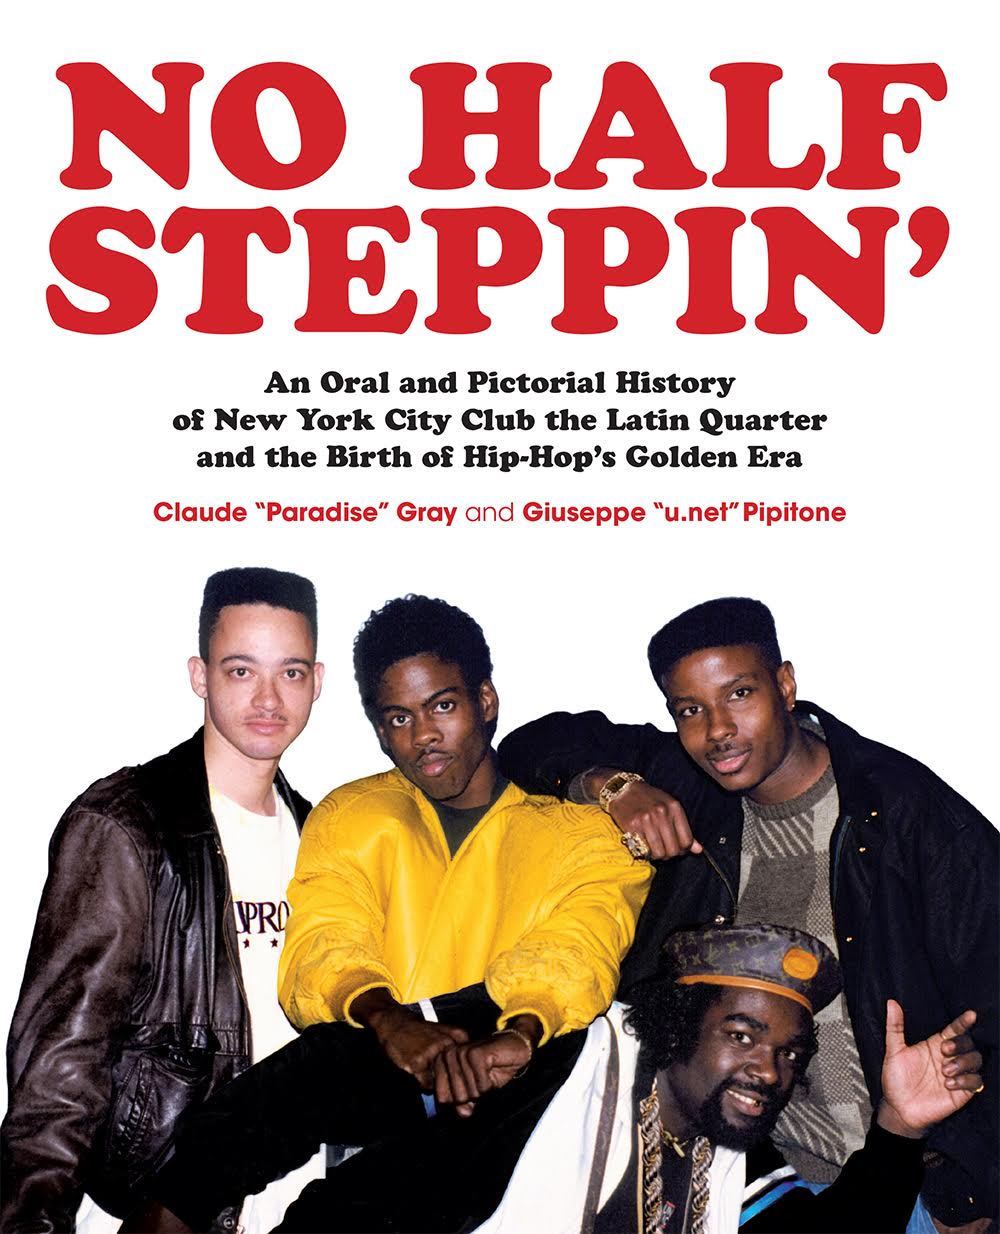 A RICH ORAL HISTORY ON ONE OF THE MOST CREATIVE TIMES IN HIP HOP